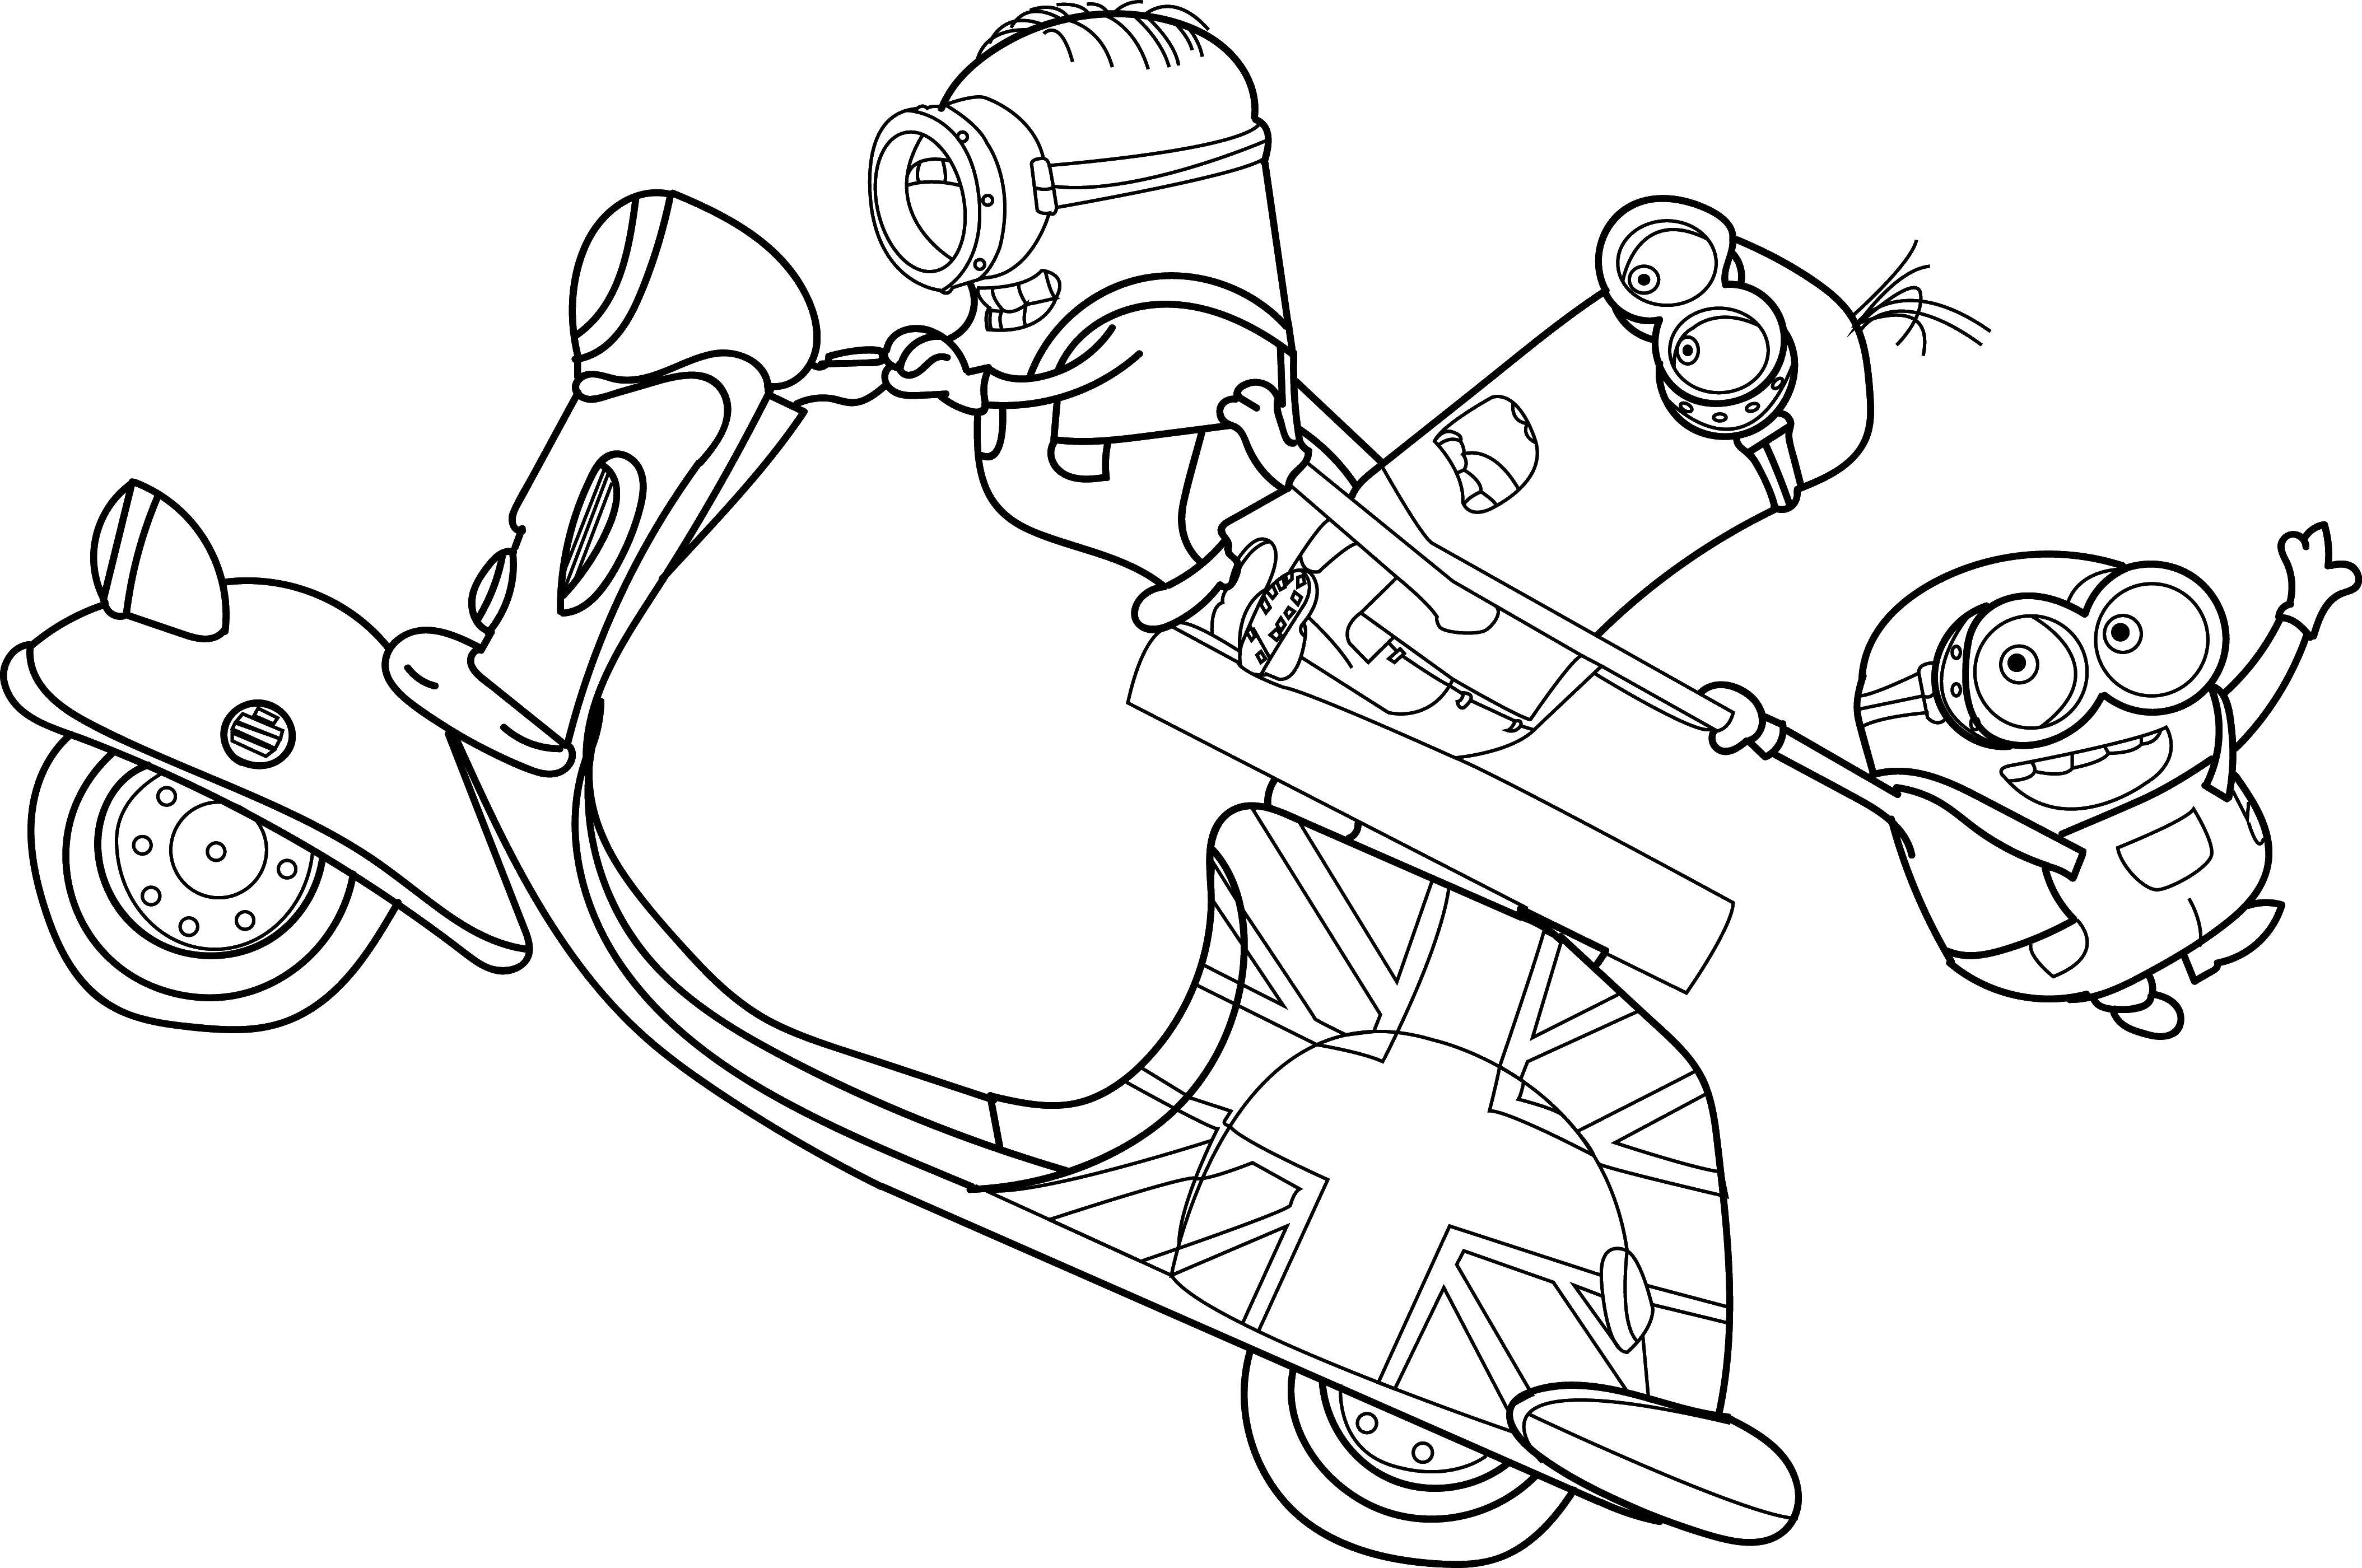 Coloring Minions riding a motorcycle. Category the minions. Tags:  minions, motorcycle.